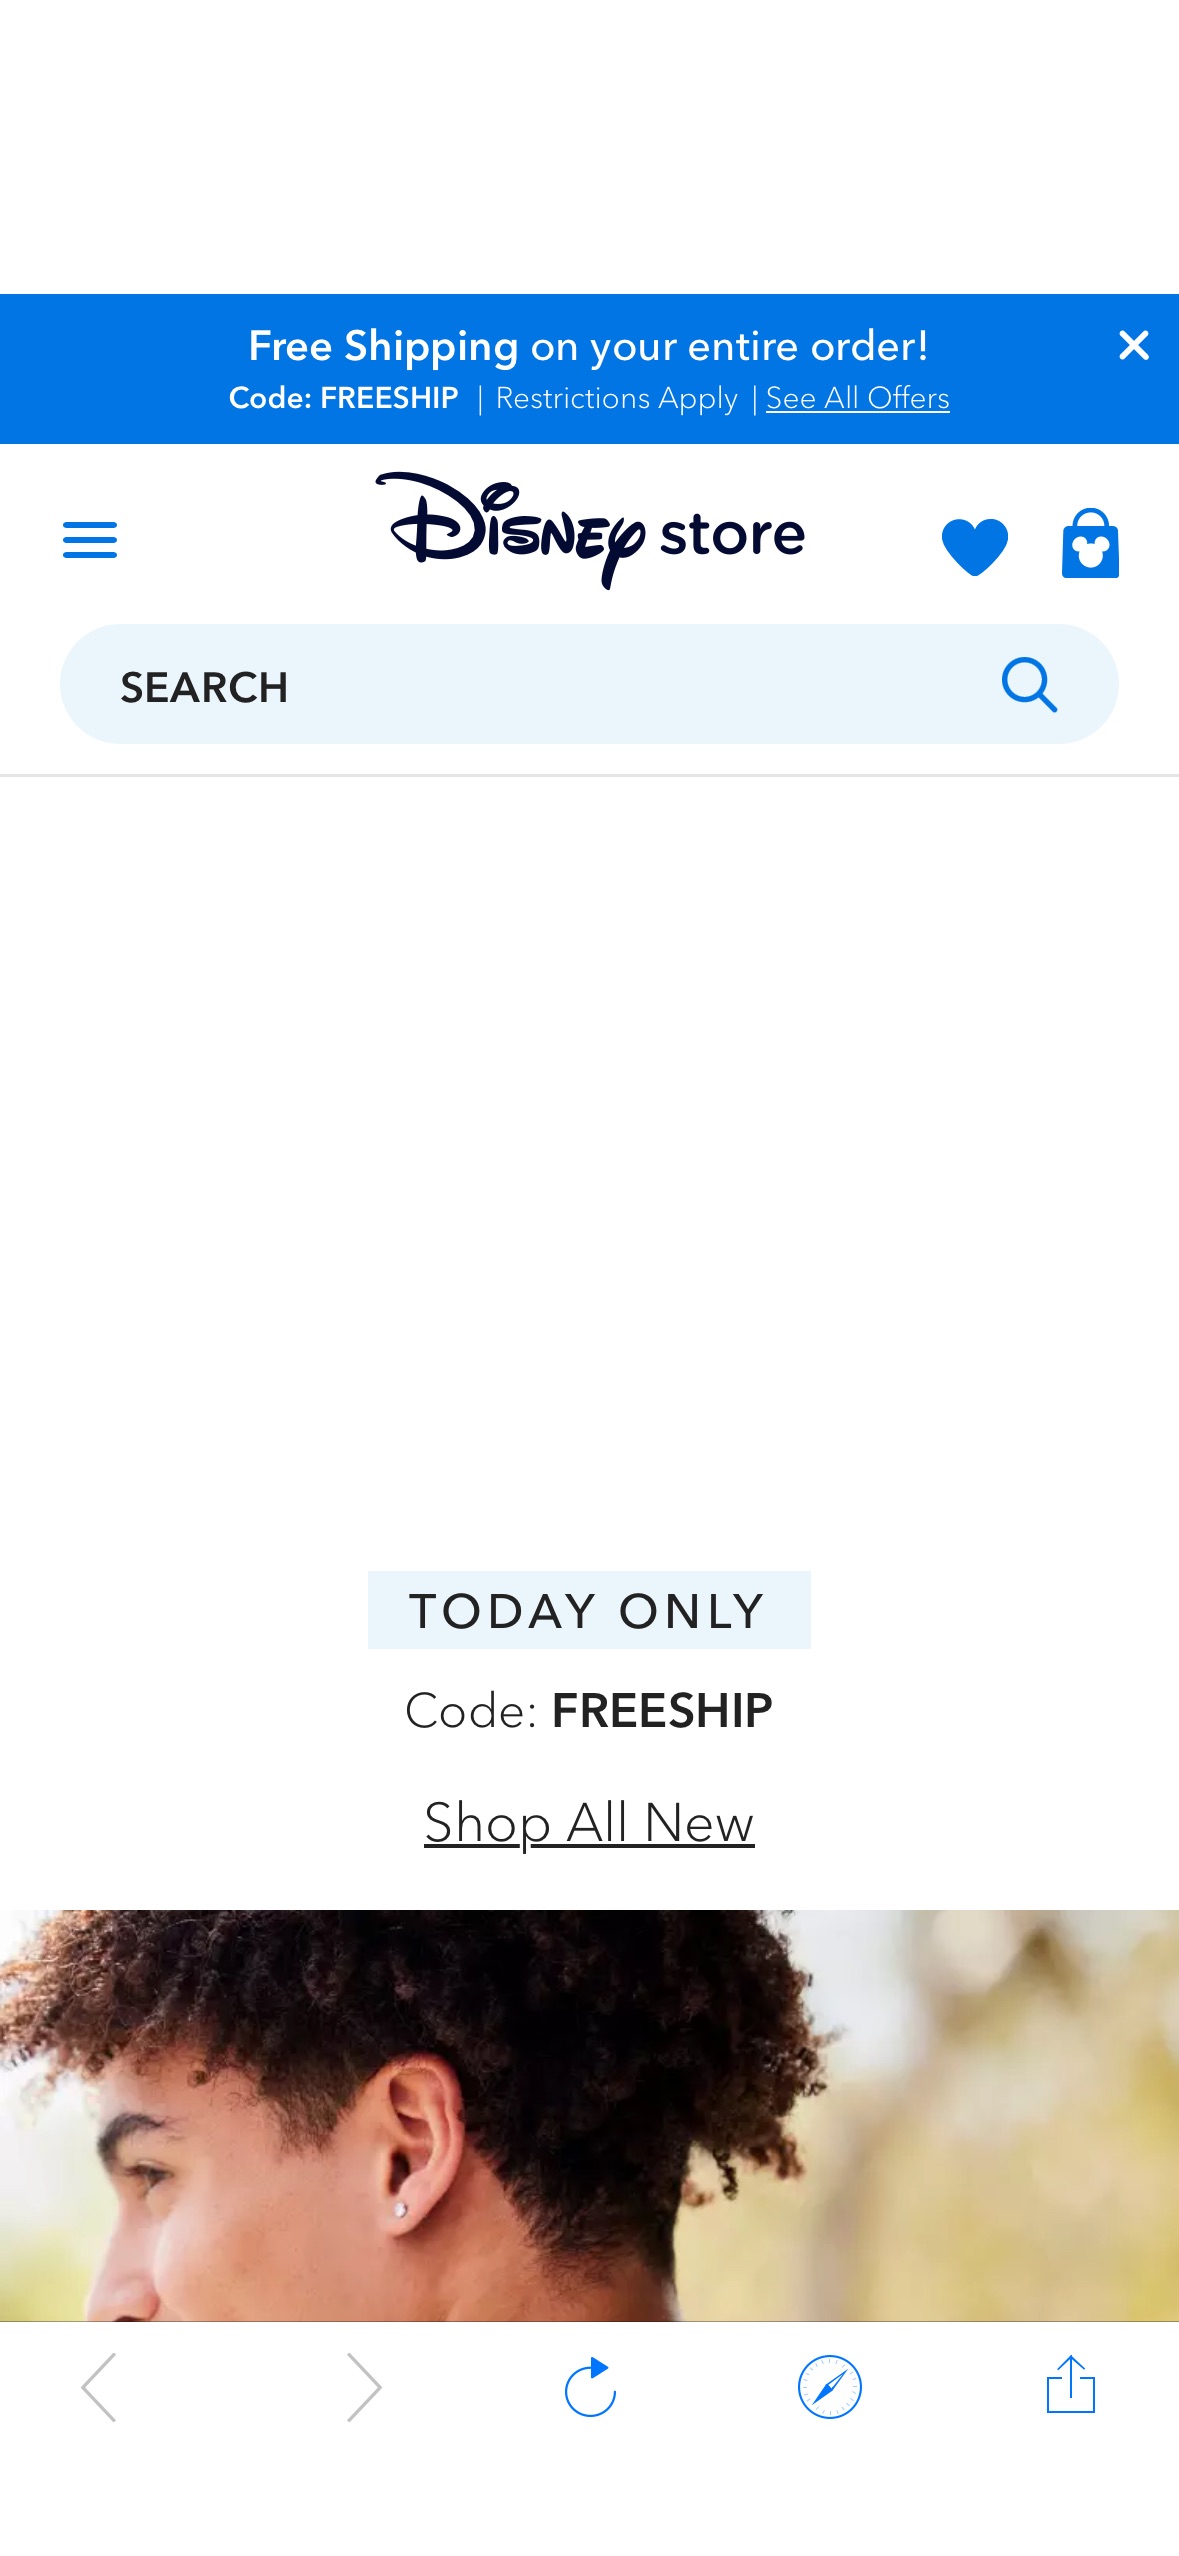 Disney Store FREE Shipping use code FREESHIP at checkout TODAY ONLY + Up to 70% Off Sale Items!